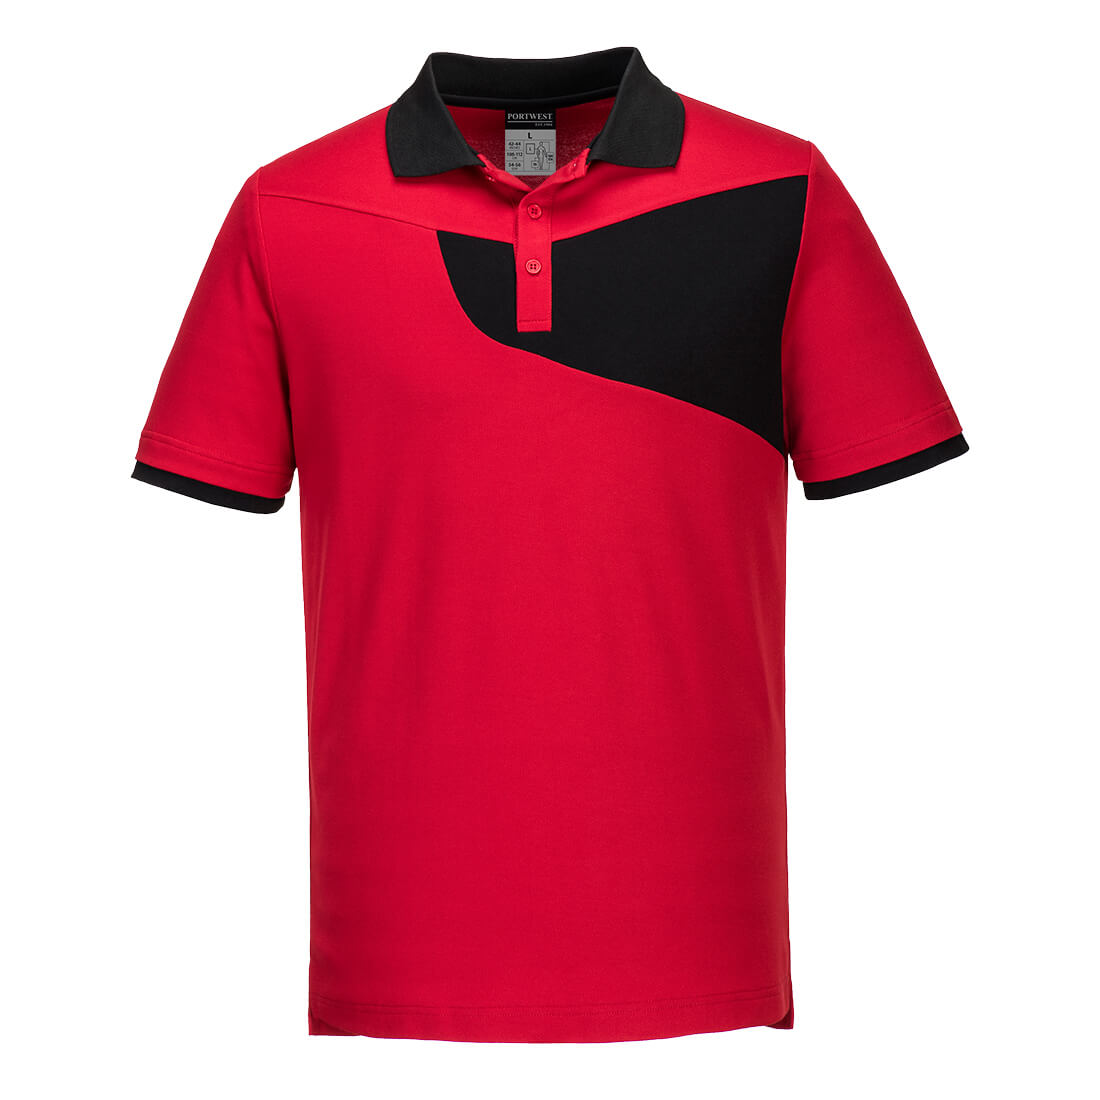 PW2 Polo Shirt S/S - Red/Black